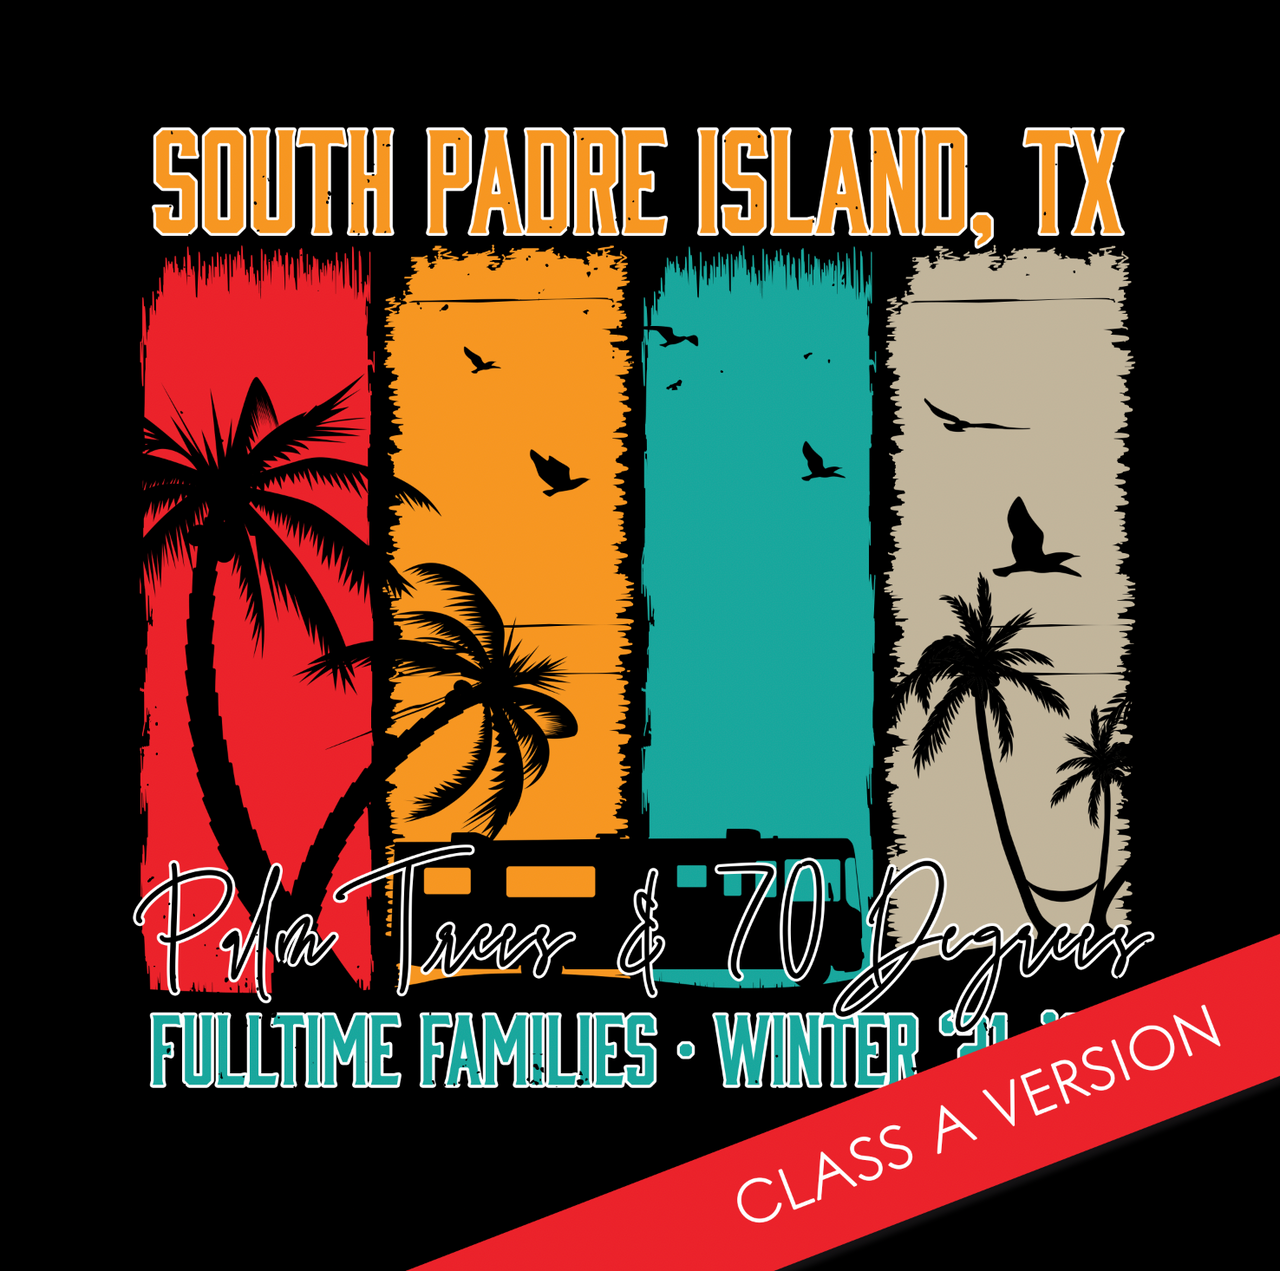 Fulltime Families South Padre Island Winter '21-'22 Limited Edition Shirt- Class A